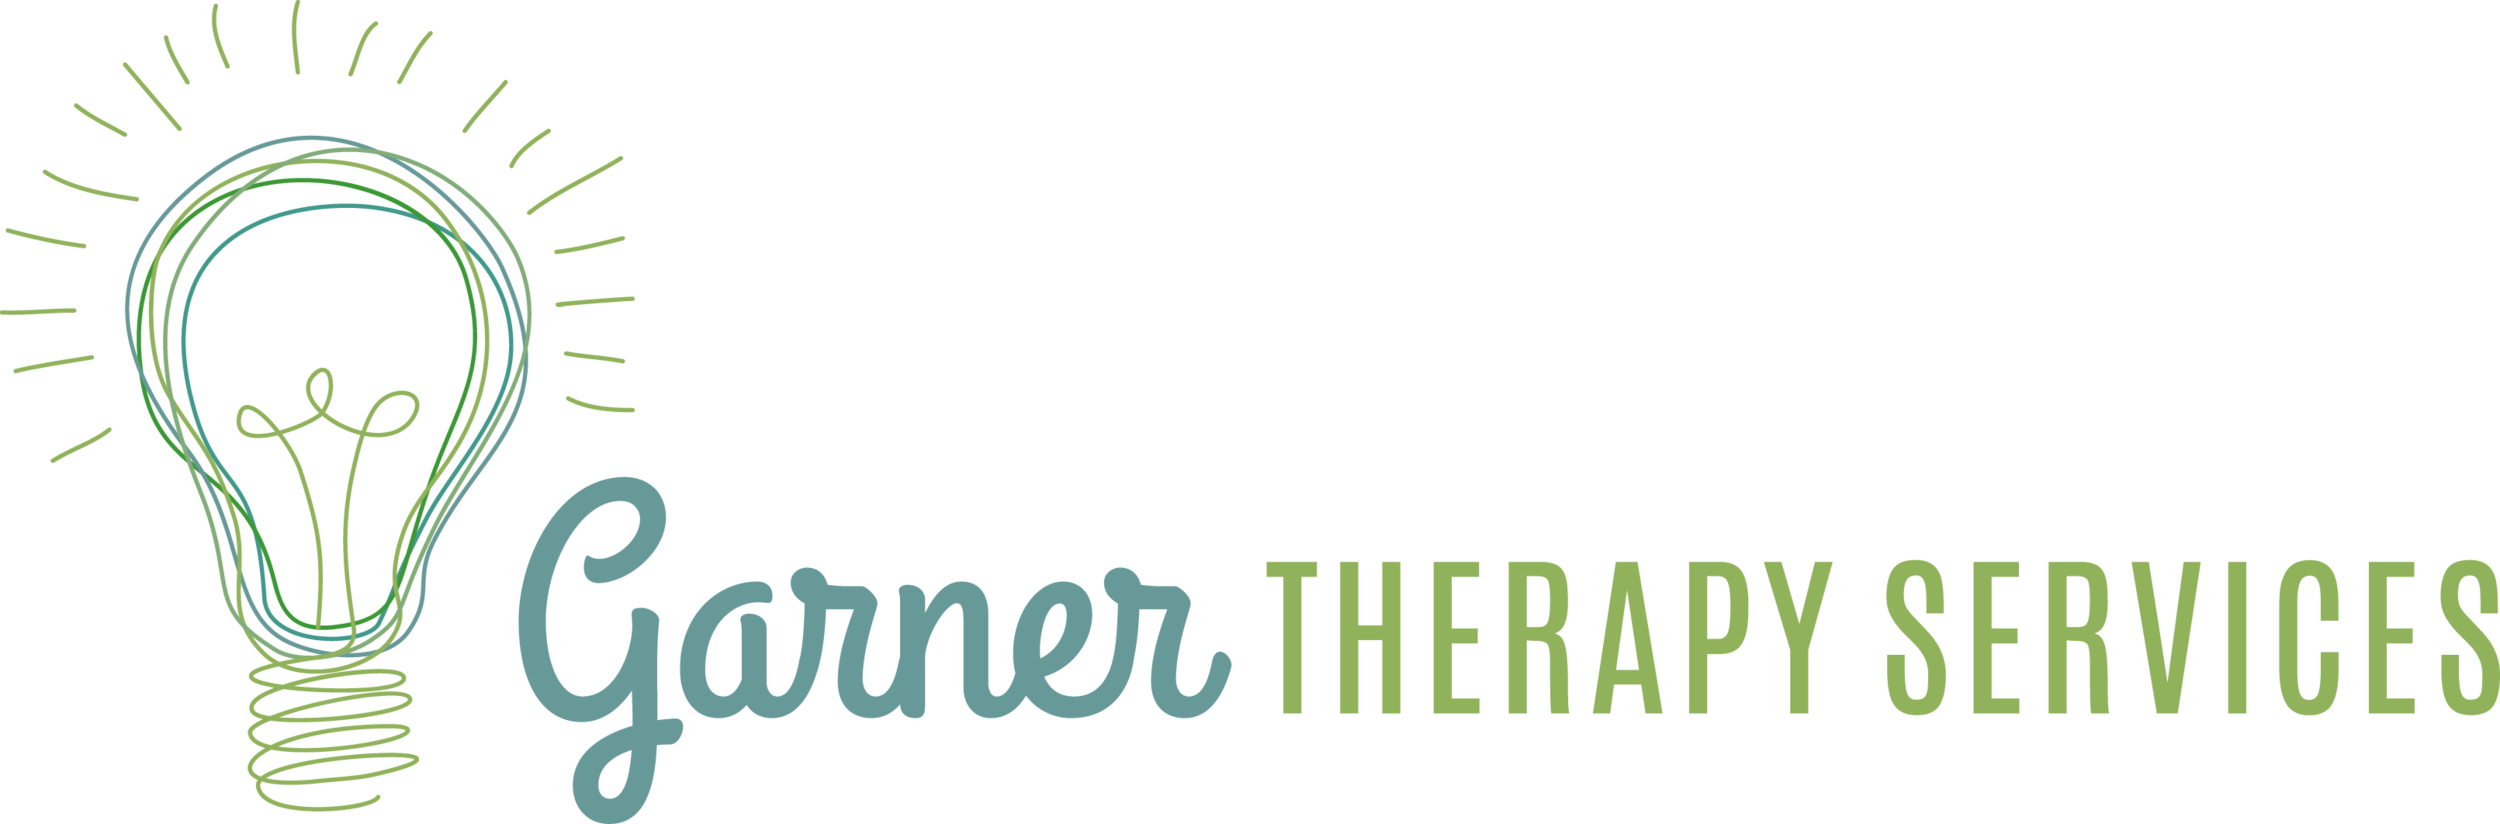 Garner Therapy Services